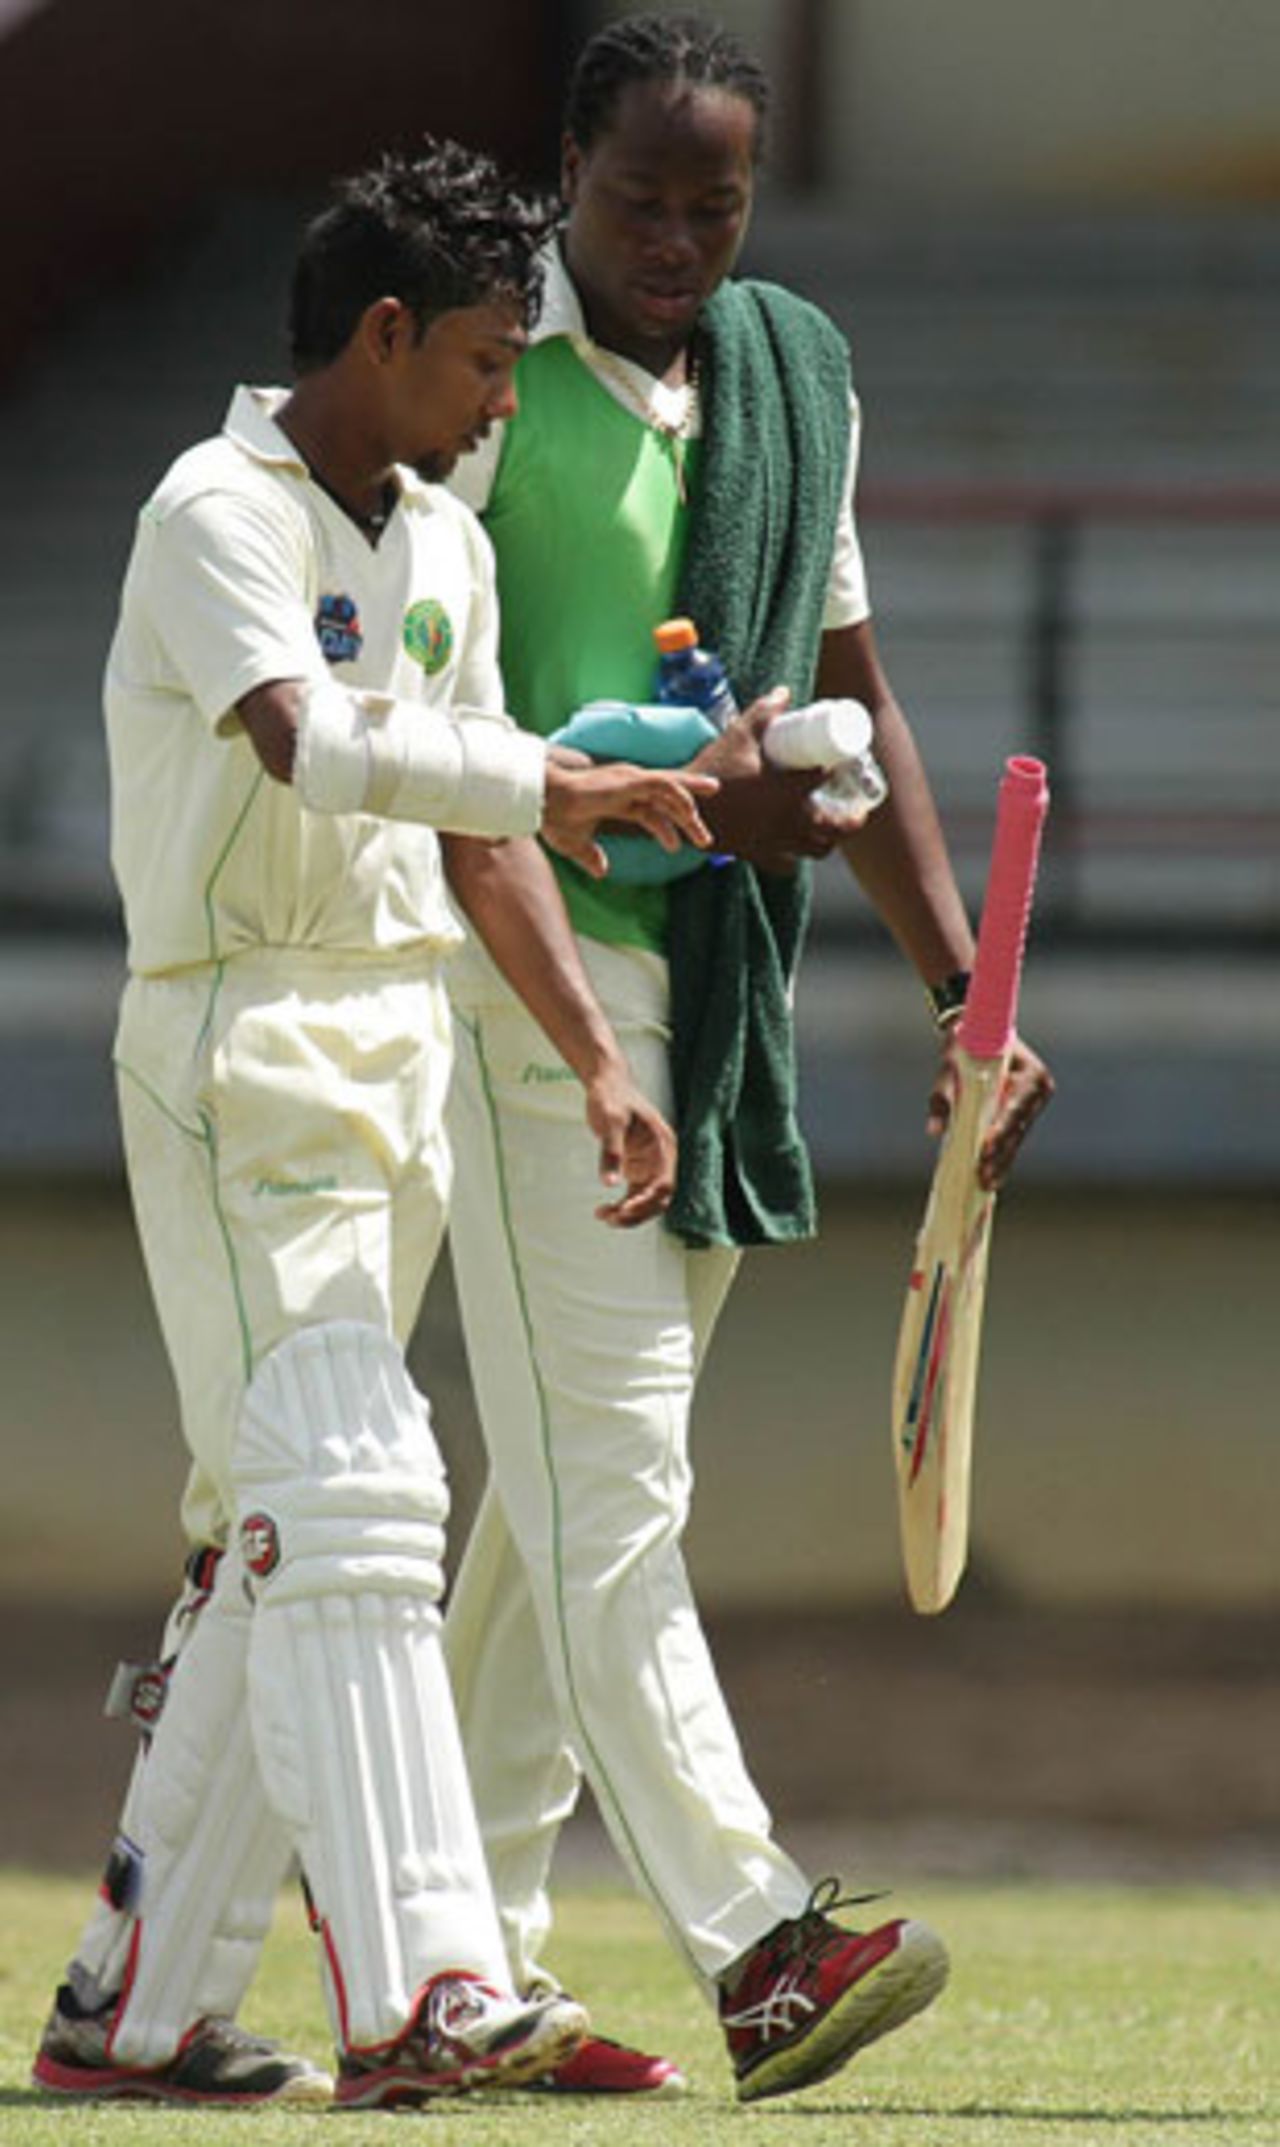 Devendra Bishoo walks off after being struck on the hand, Trinidad &Tobago v Guyana, Regional Four Day Competition, Day 4, Port of Spain March 9, 2013